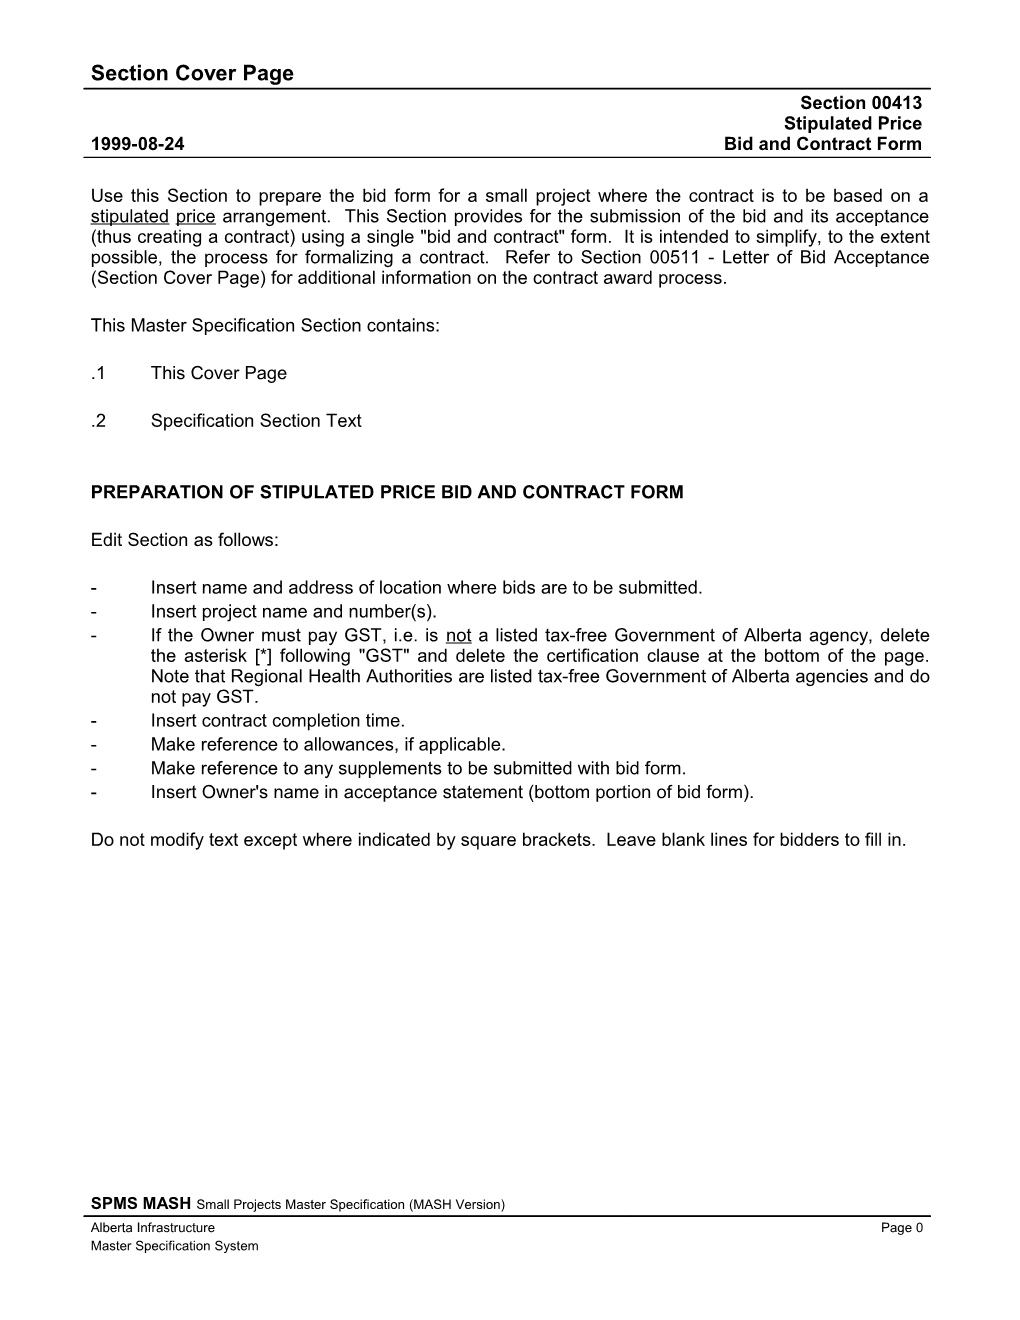 00413 - Stipulated Price Bid and Contract Form